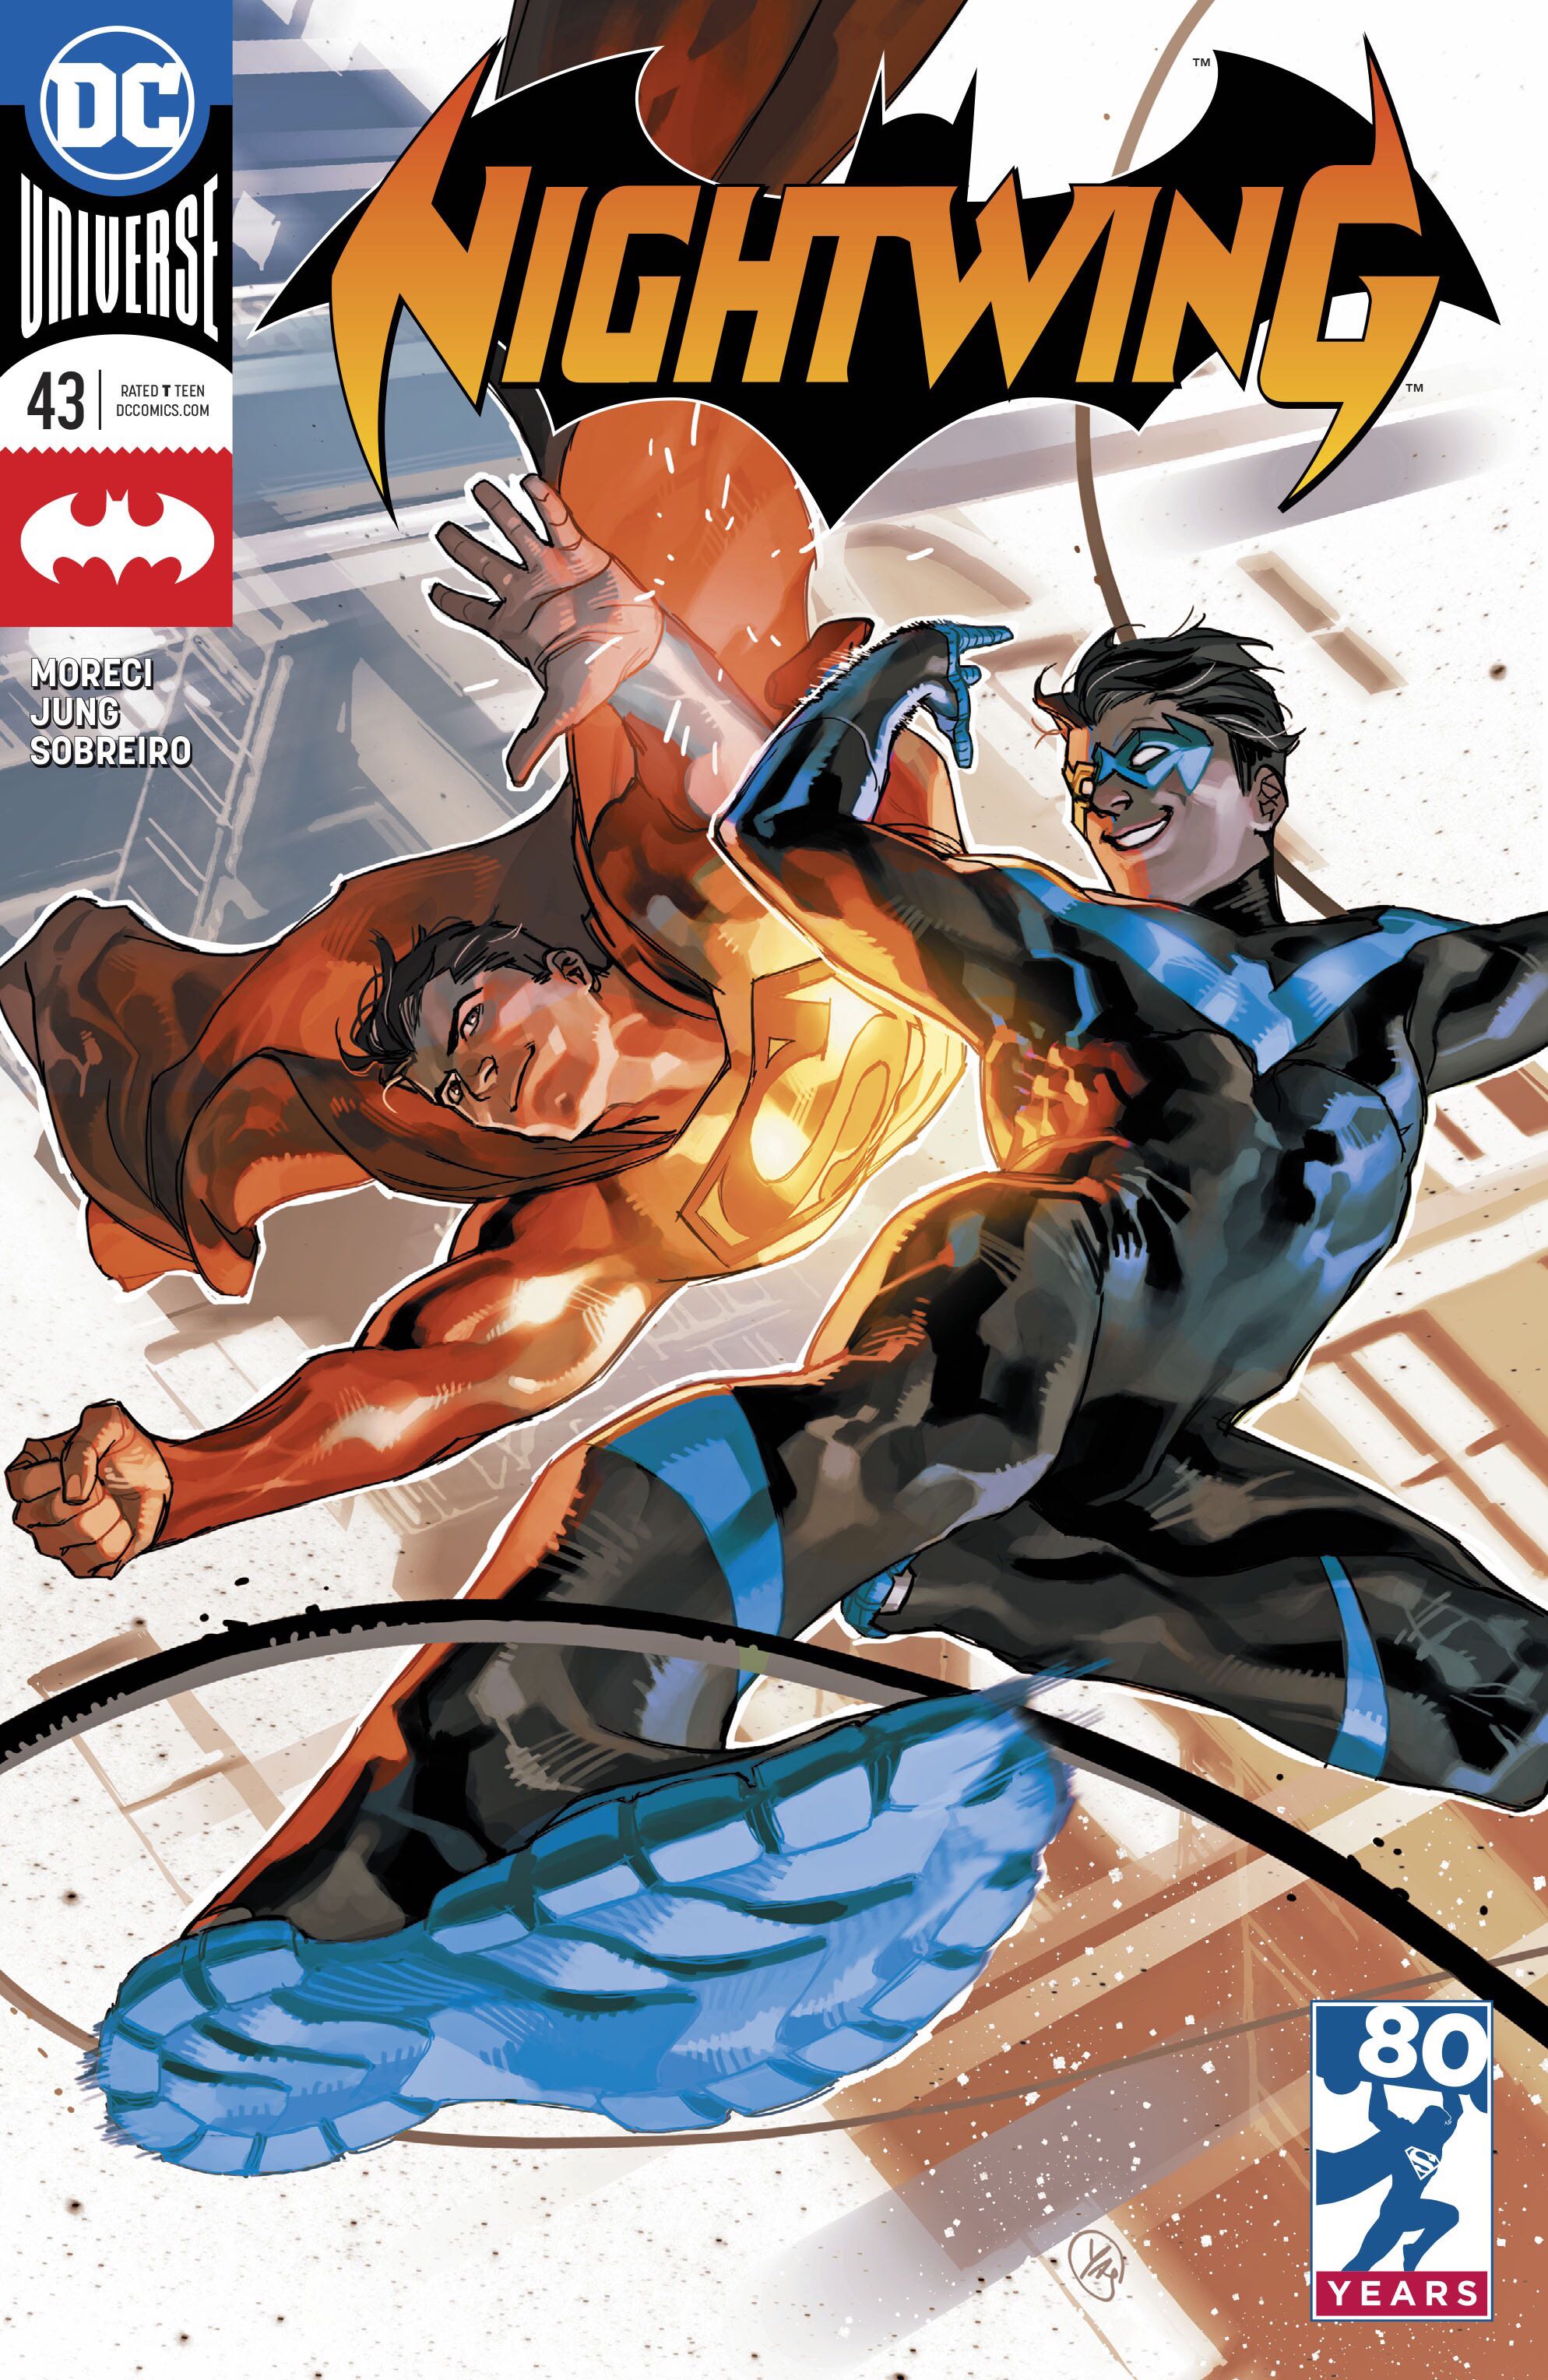 Nightwing (2016-present) - DC Comics (43 - Apr 2018) comic book collectible [Barcode 76194134174304311] - Main Image 2